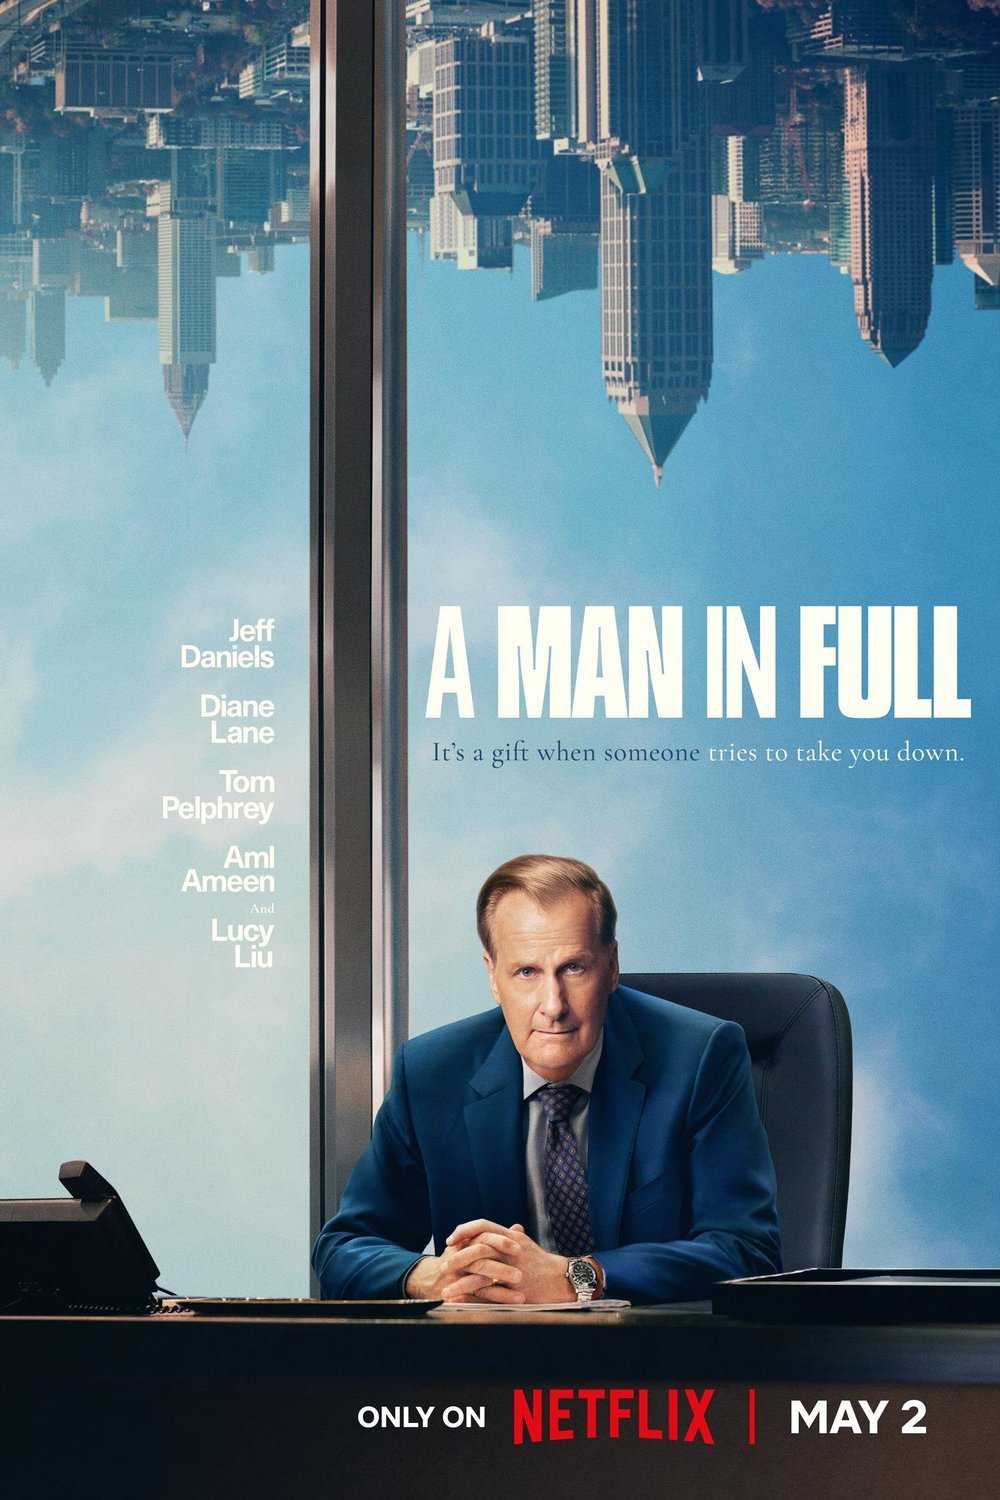 Poster of the movie A Man in Full